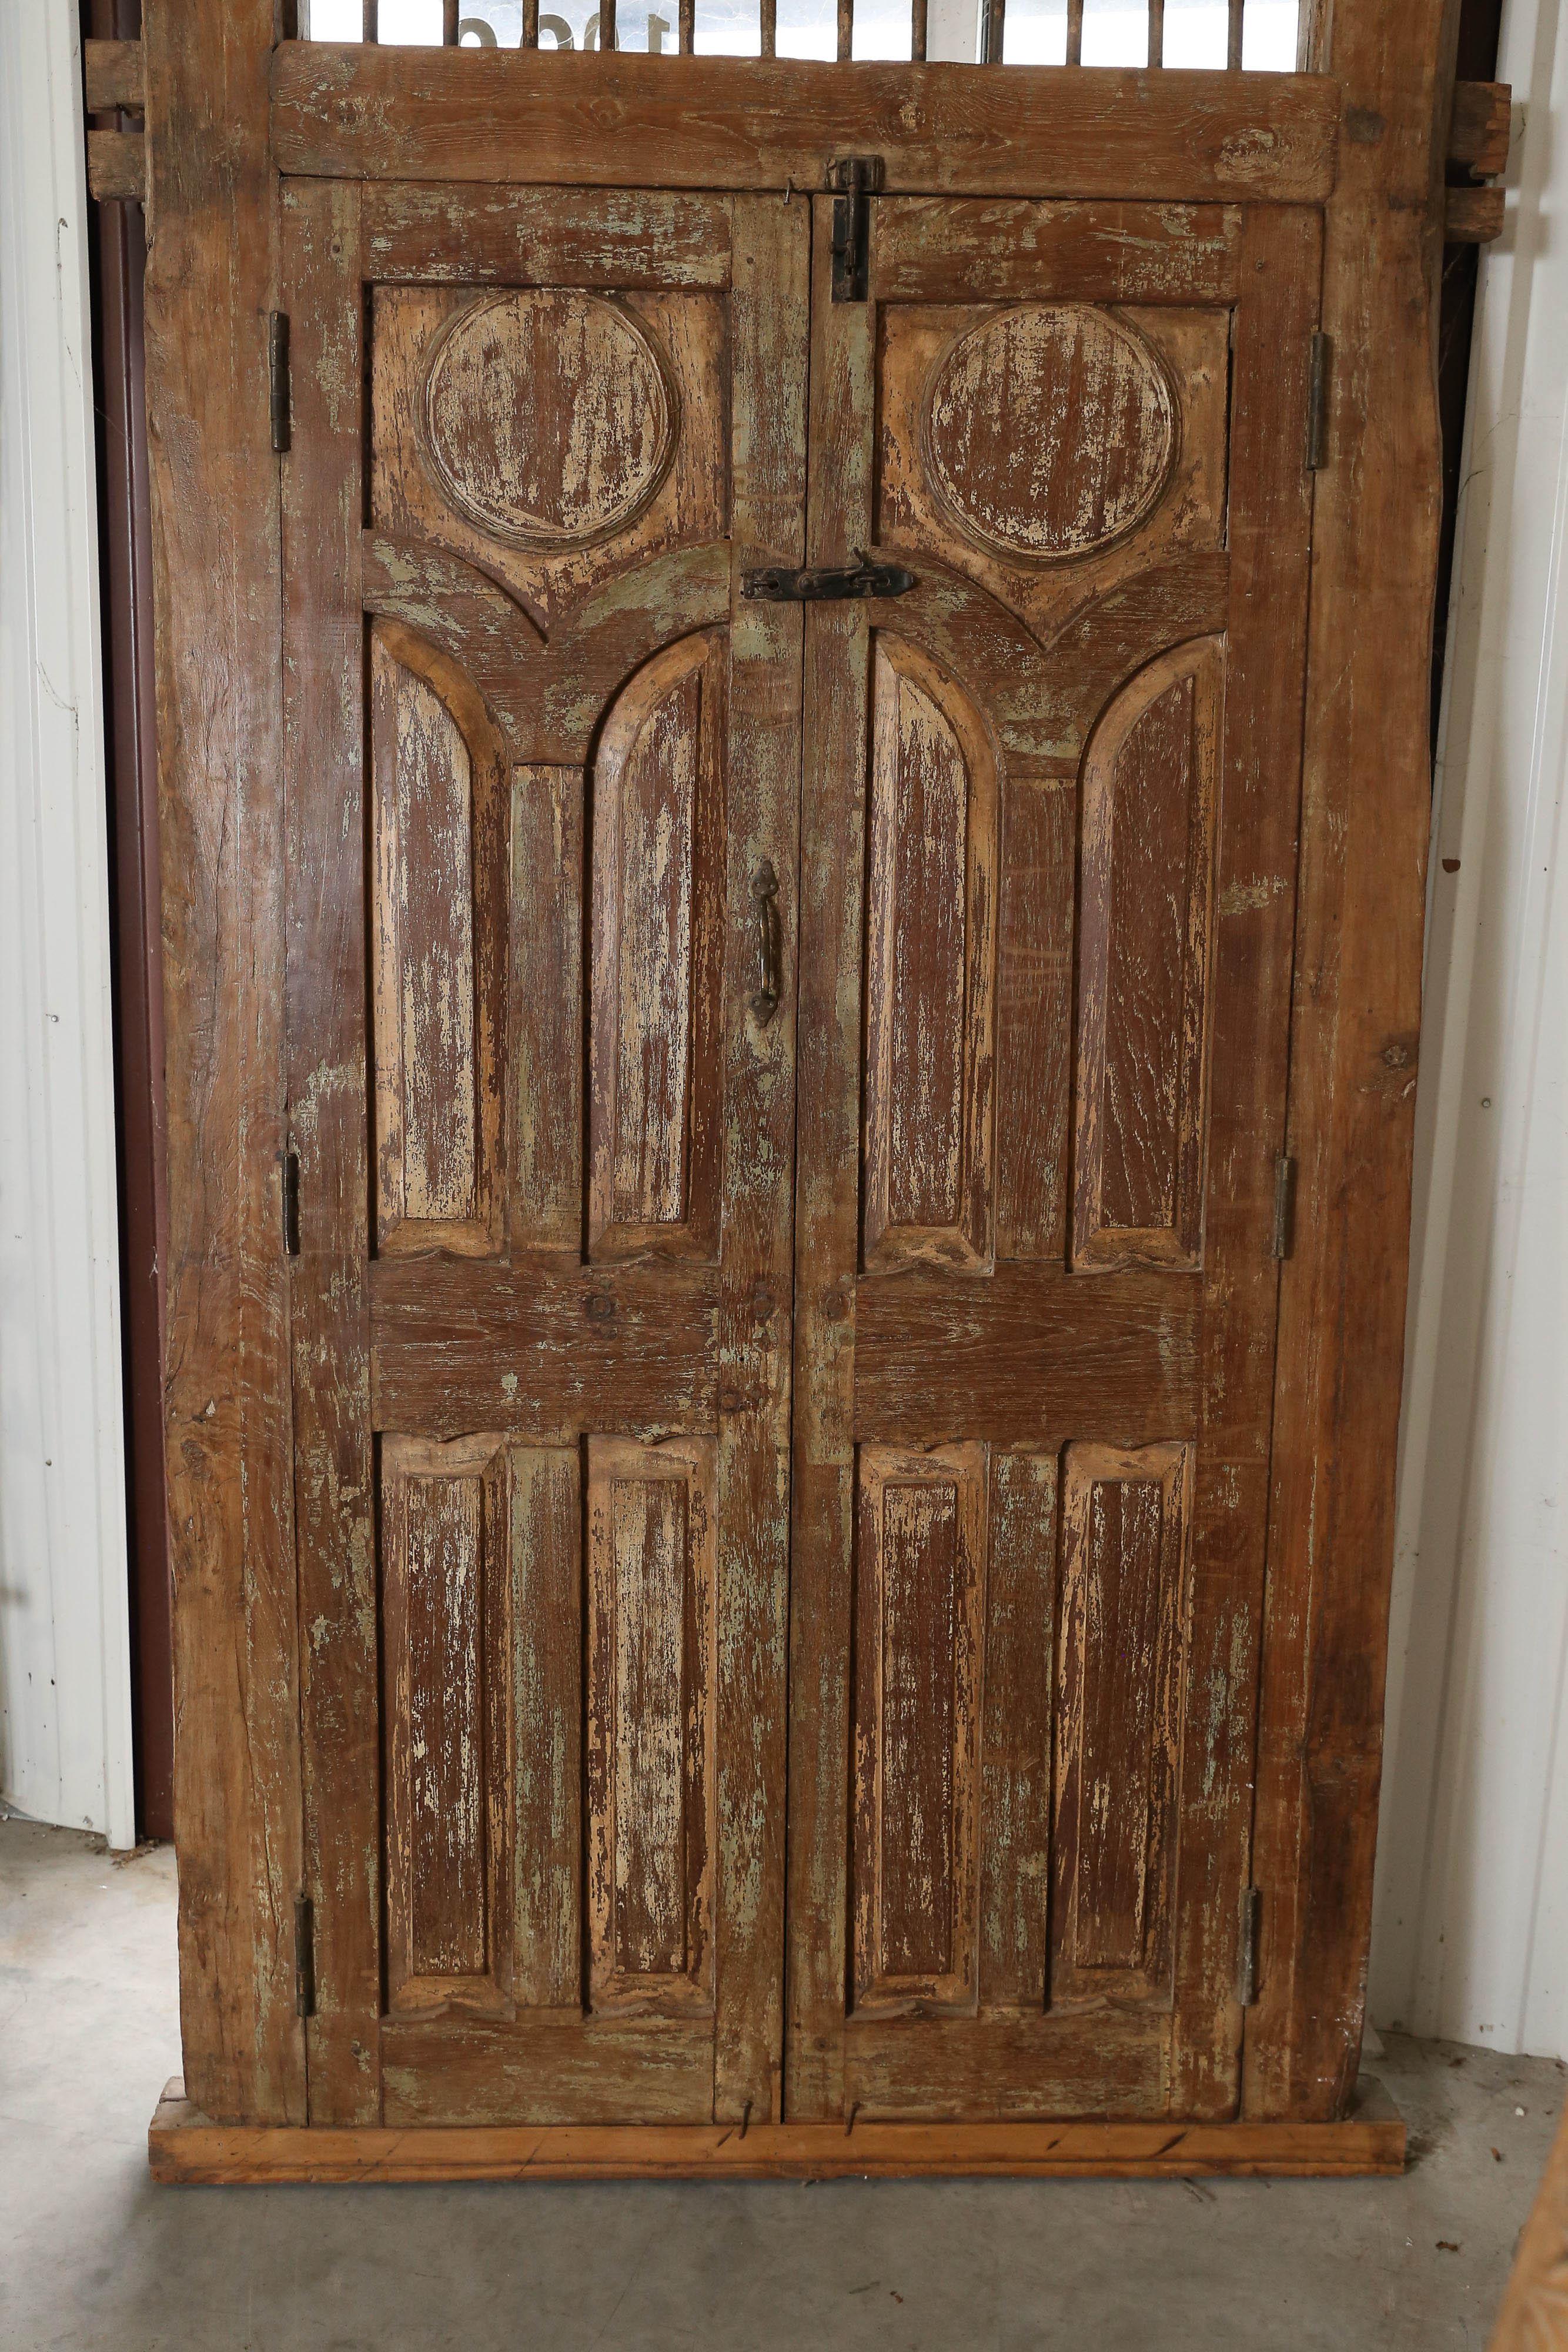 Grand Mid-19th Century Solid Teak Wood Entry Door from a Colonial Mansion For Sale 2